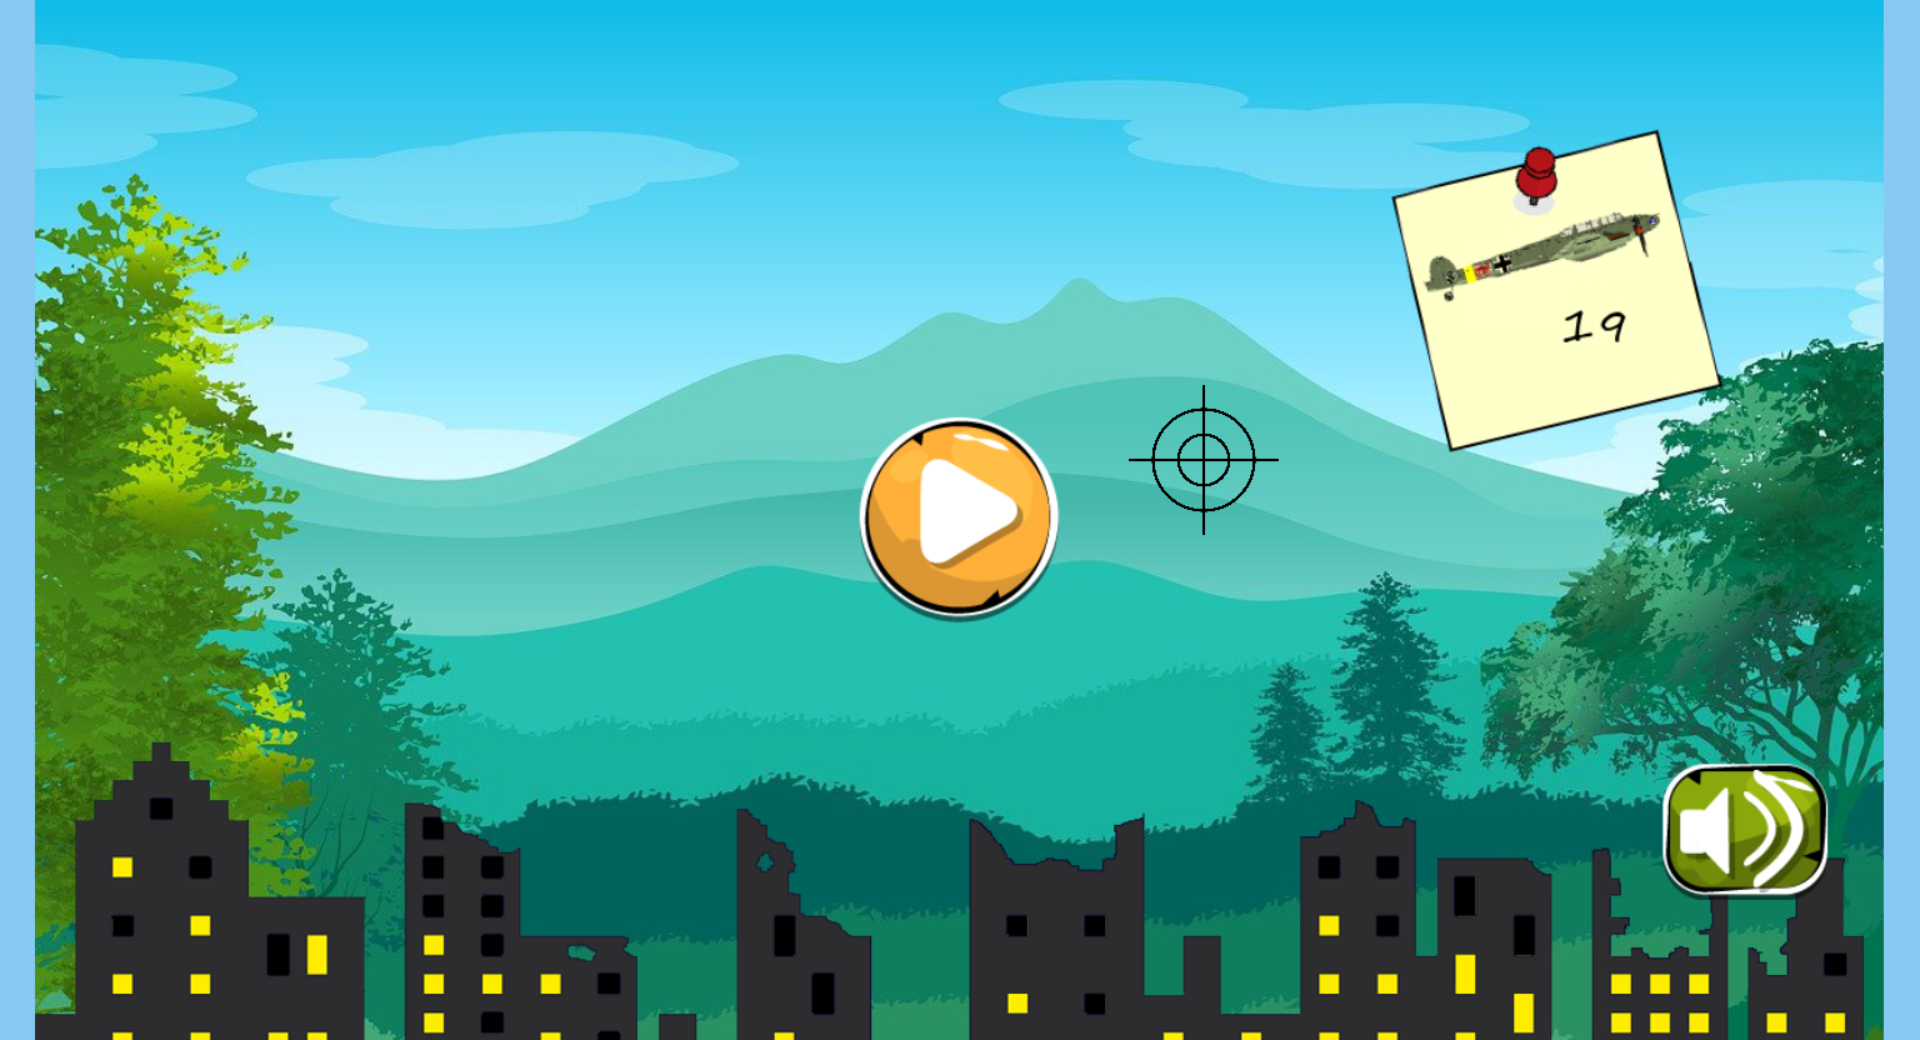 Shoot down planes! — play online for free on Yandex Games